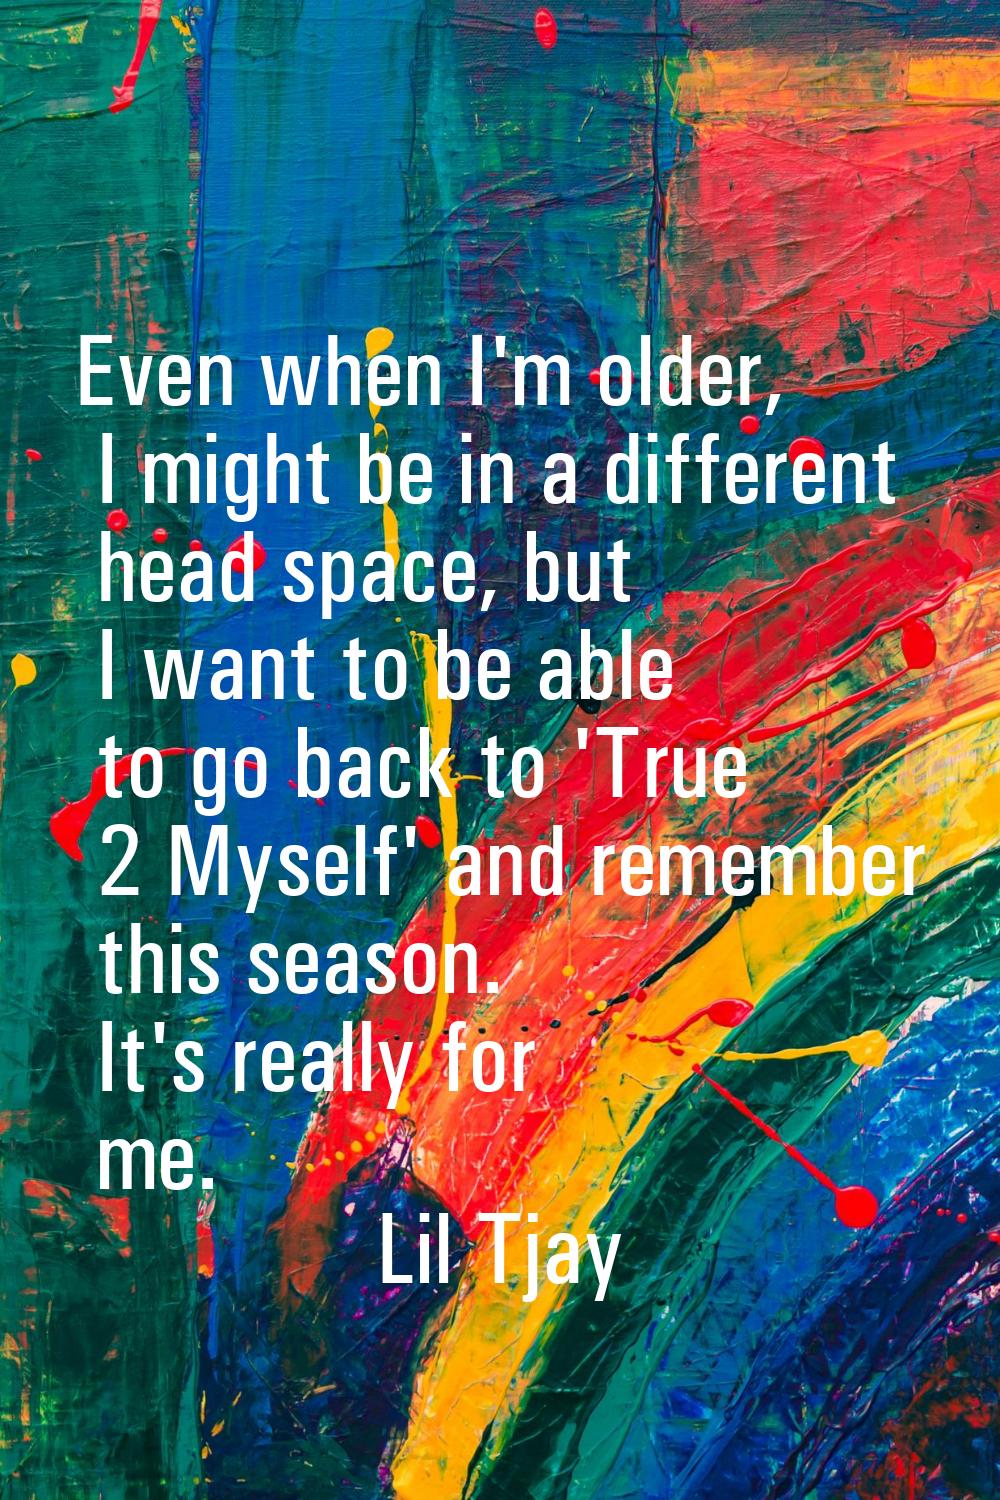 Even when I'm older, I might be in a different head space, but I want to be able to go back to 'Tru